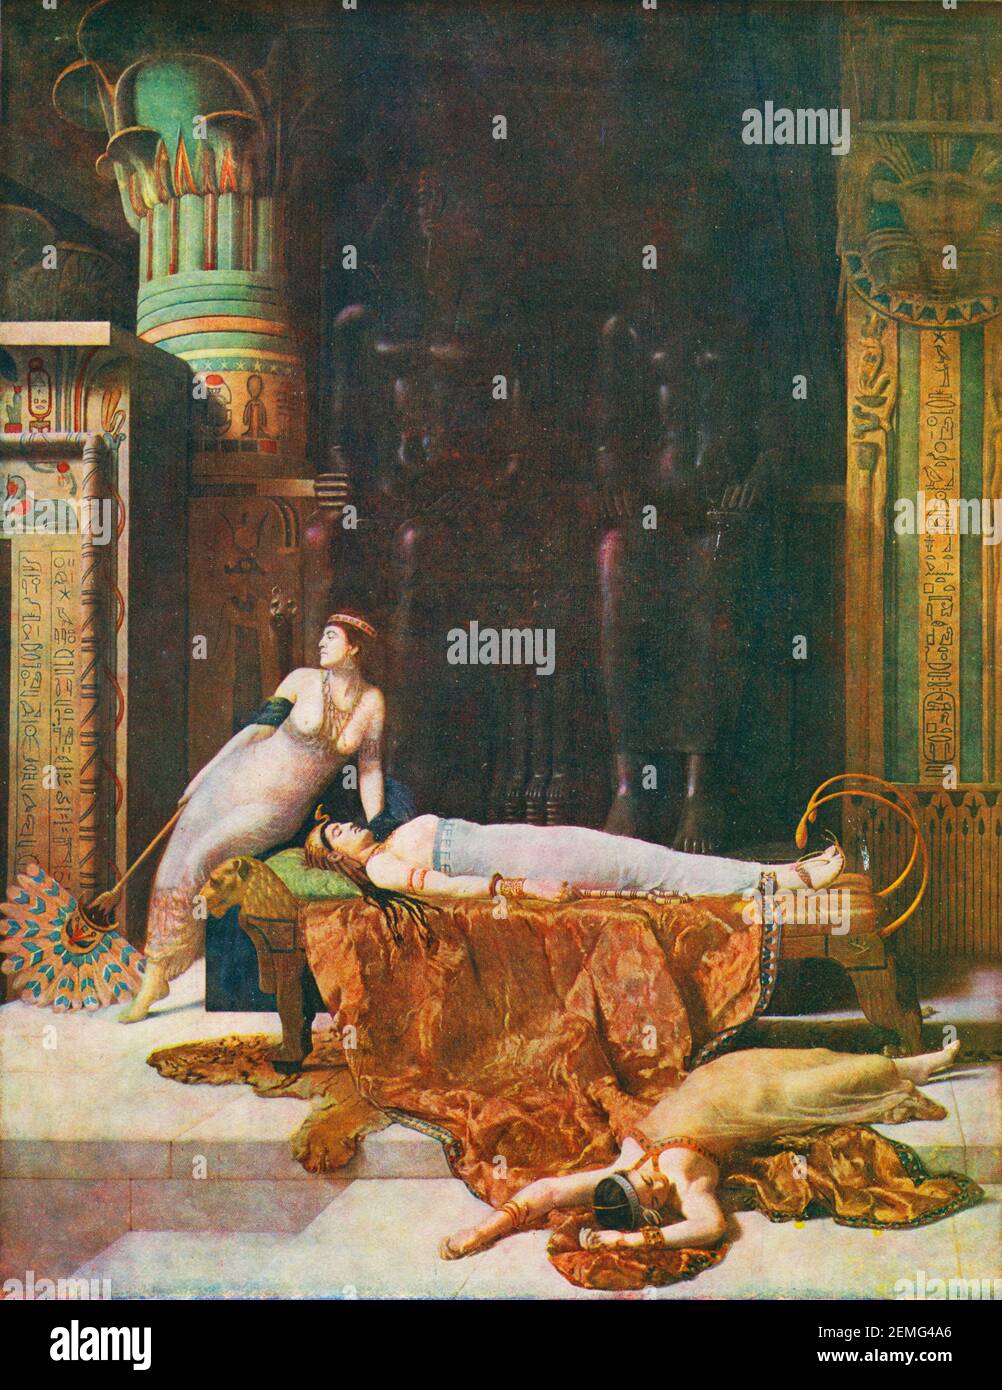 An illustration of the death of Cleopatra VII last ruler of Ptolemaic Egypt, 30 BC, in Alexandria. The painting shows the queen on her death bed and her servants Eiras and Charmion also in their death throes. From an 1890 painting by John Collier 1850 to 1934 Stock Photo